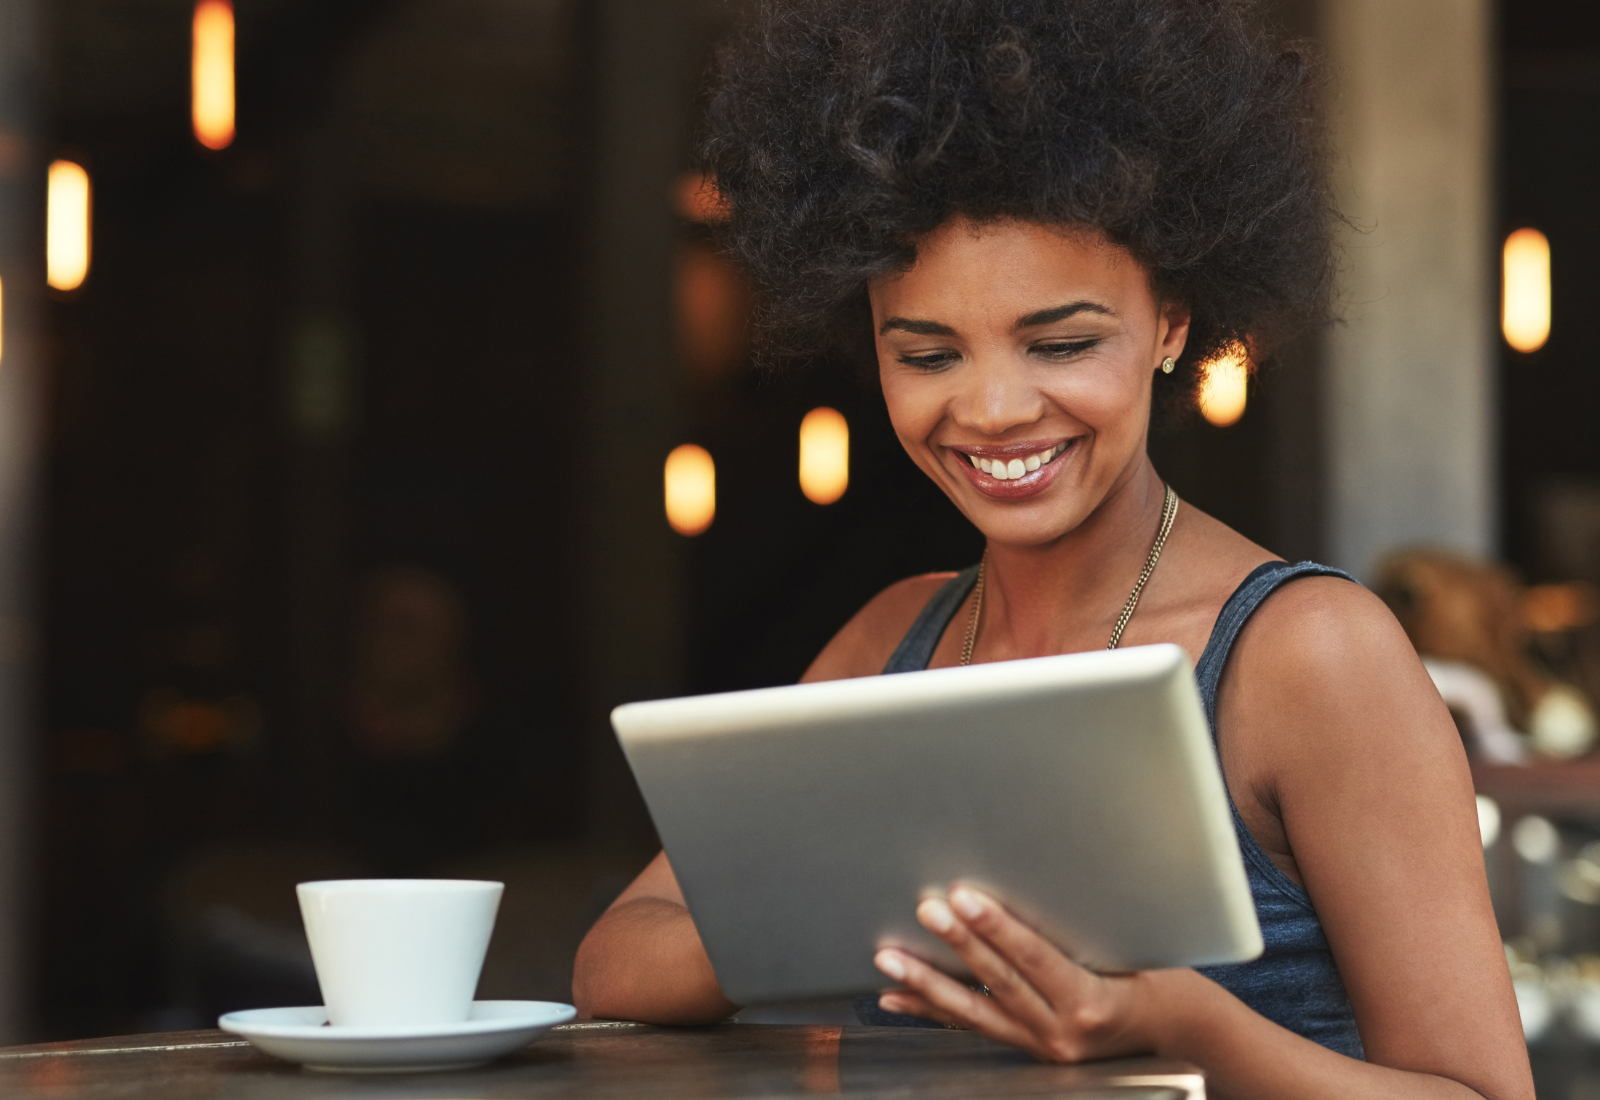 Image of a woman using a tablet and smiling while sitting at a table in a restaurant with a coffee cup